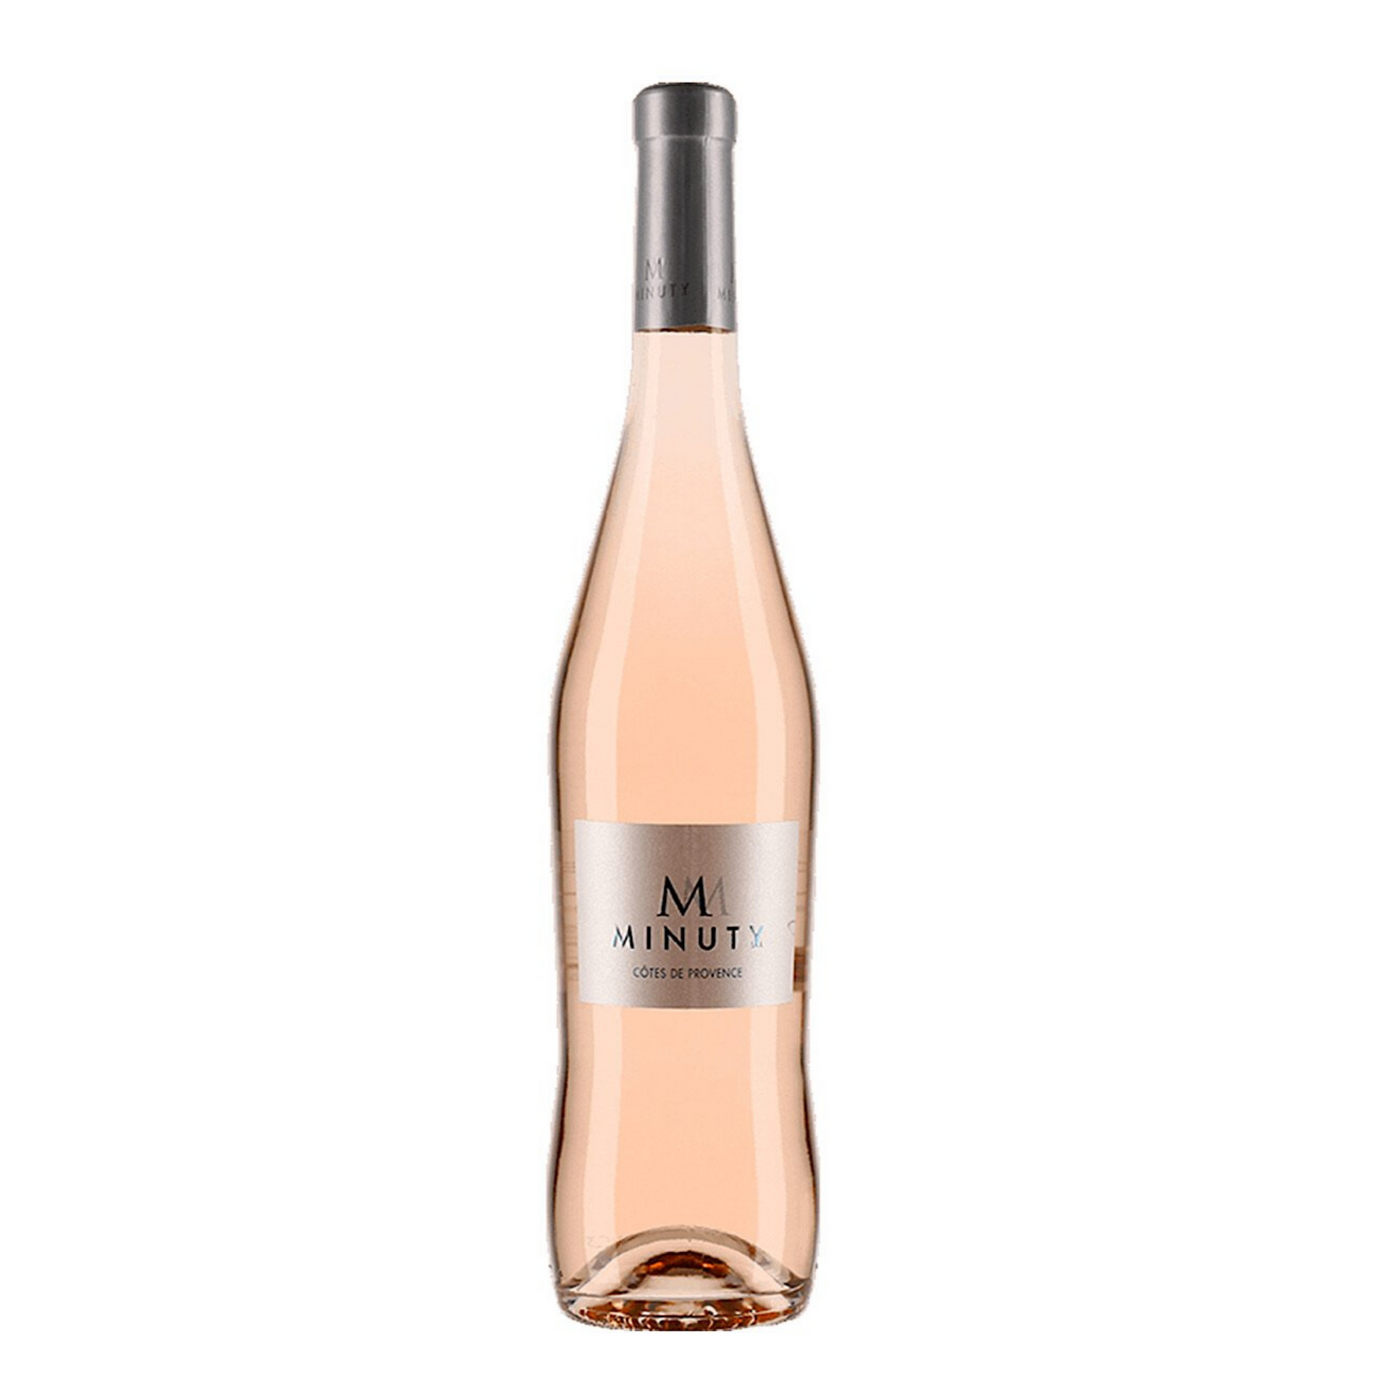 Chateau Minuty M Provence Rose 75cl